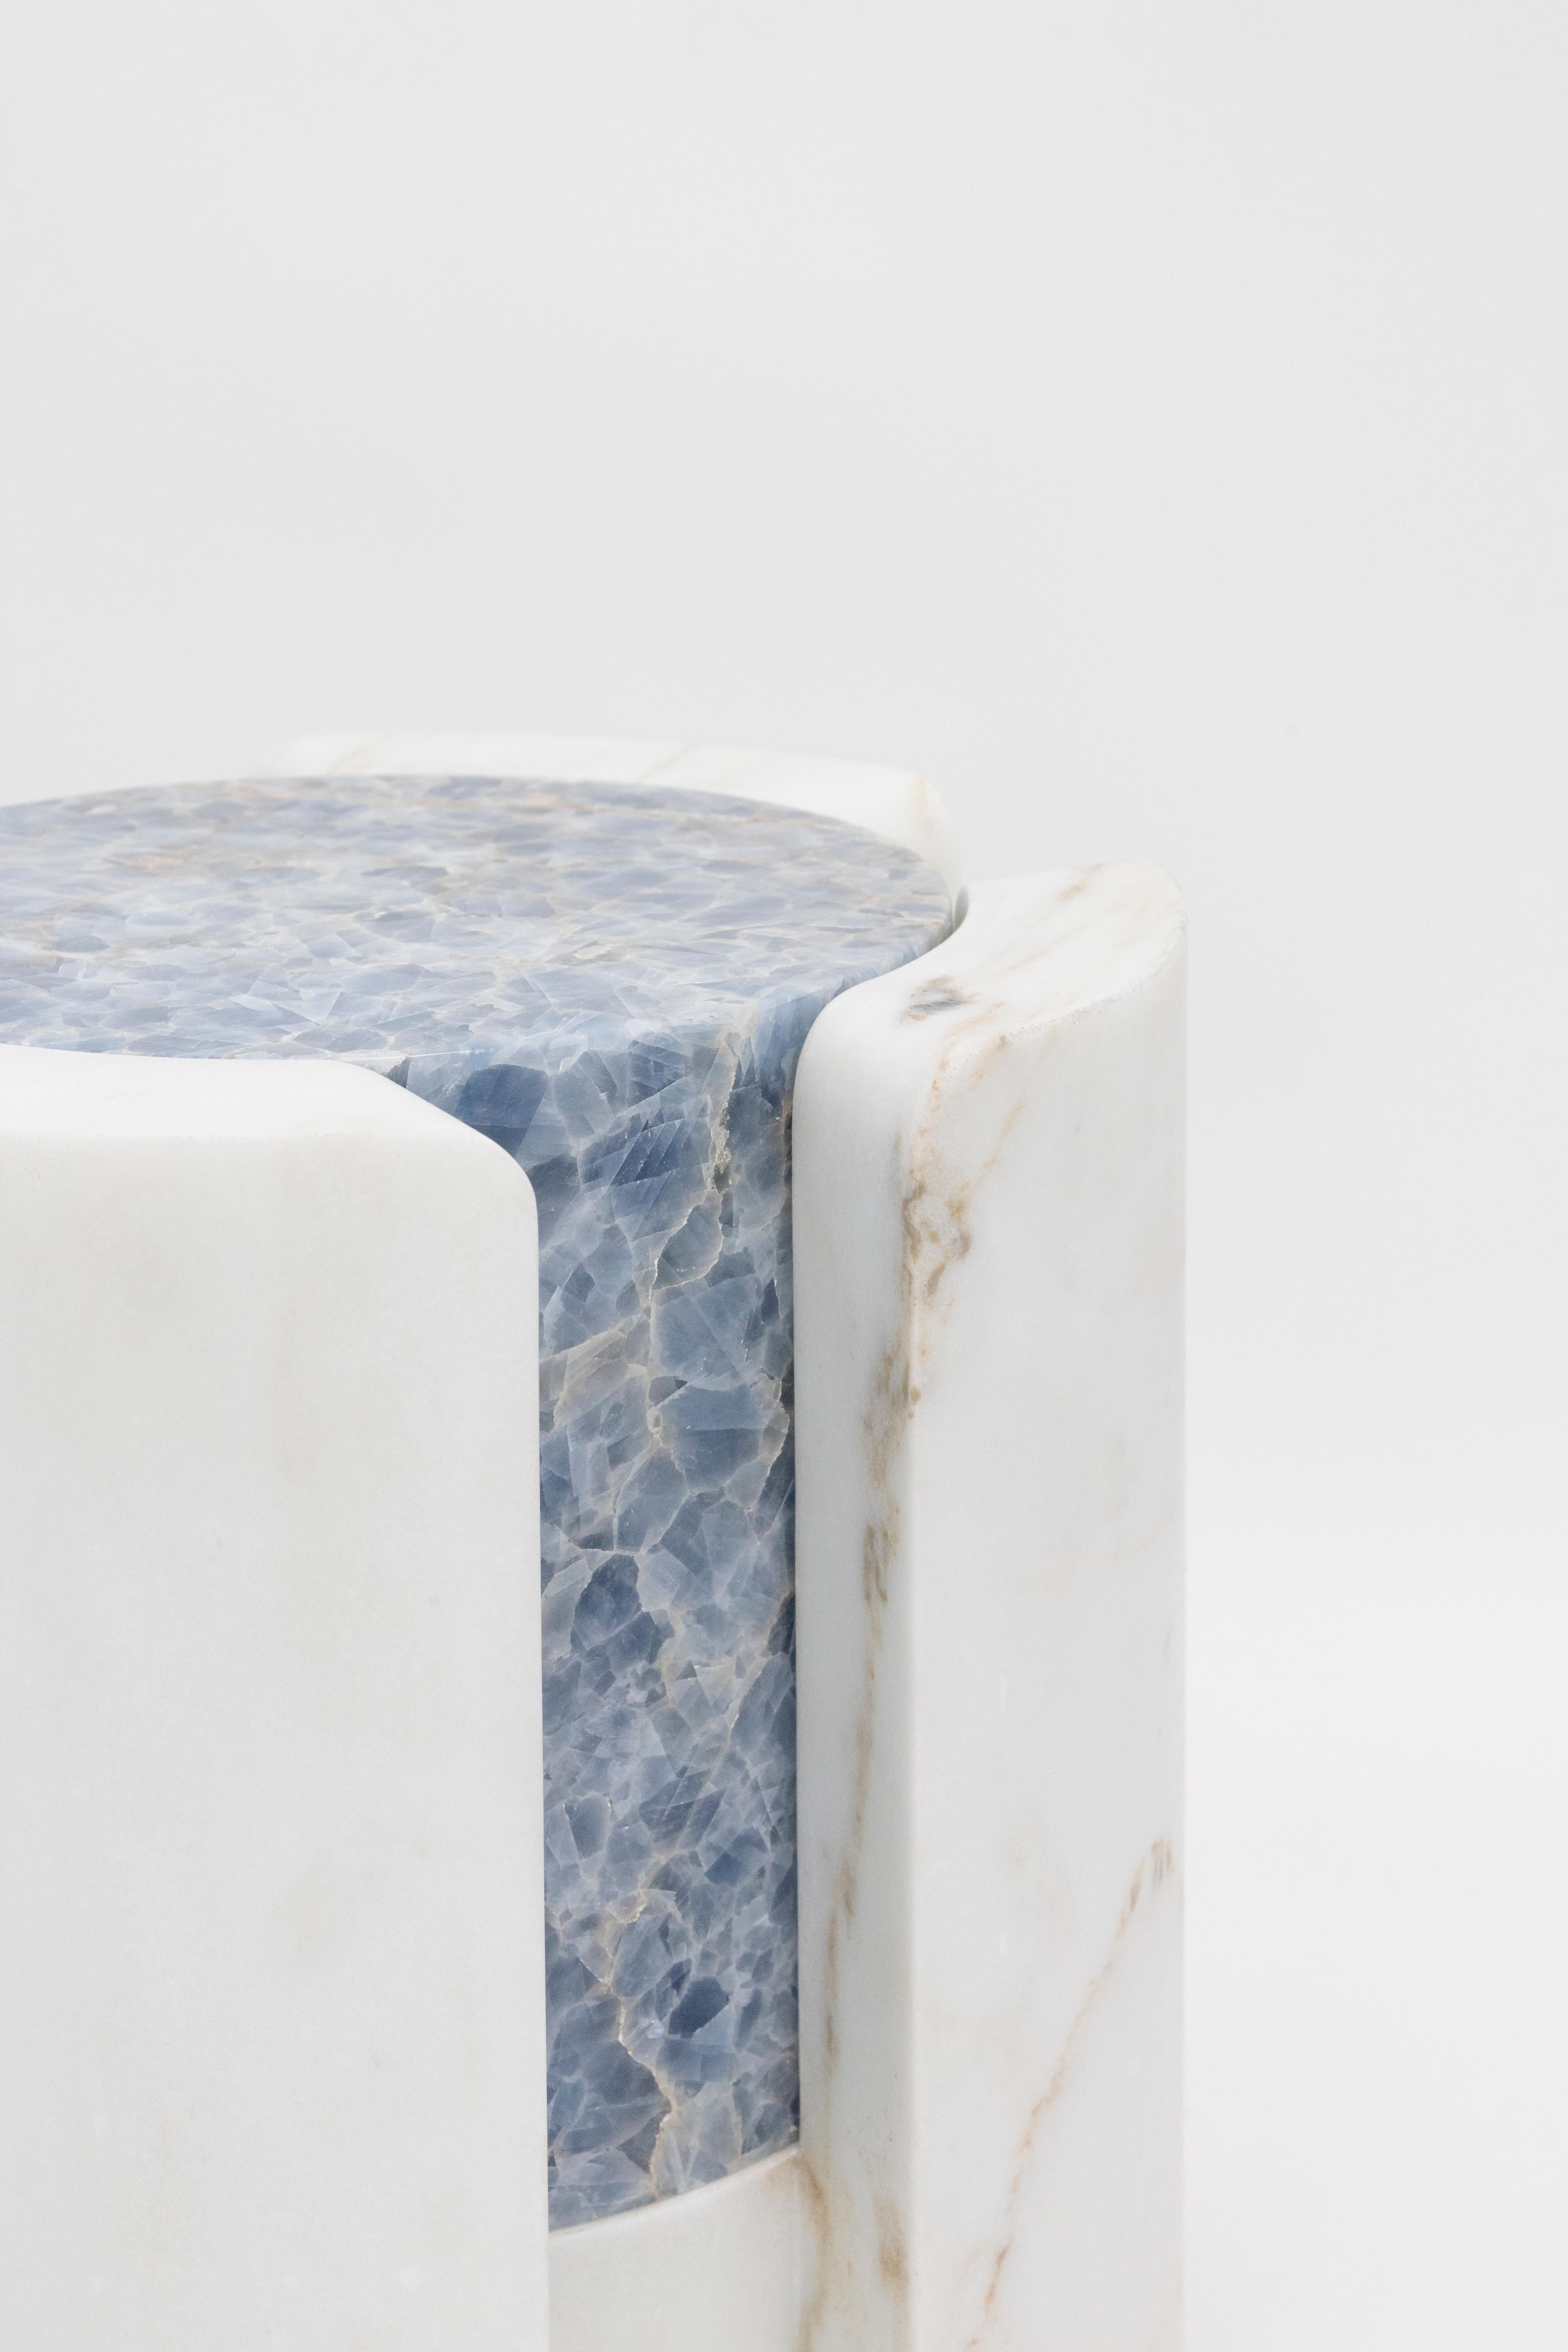 Hand-Crafted Volcanic Shades of marble III - Sten Studio - Golden calacatta and blue calcite